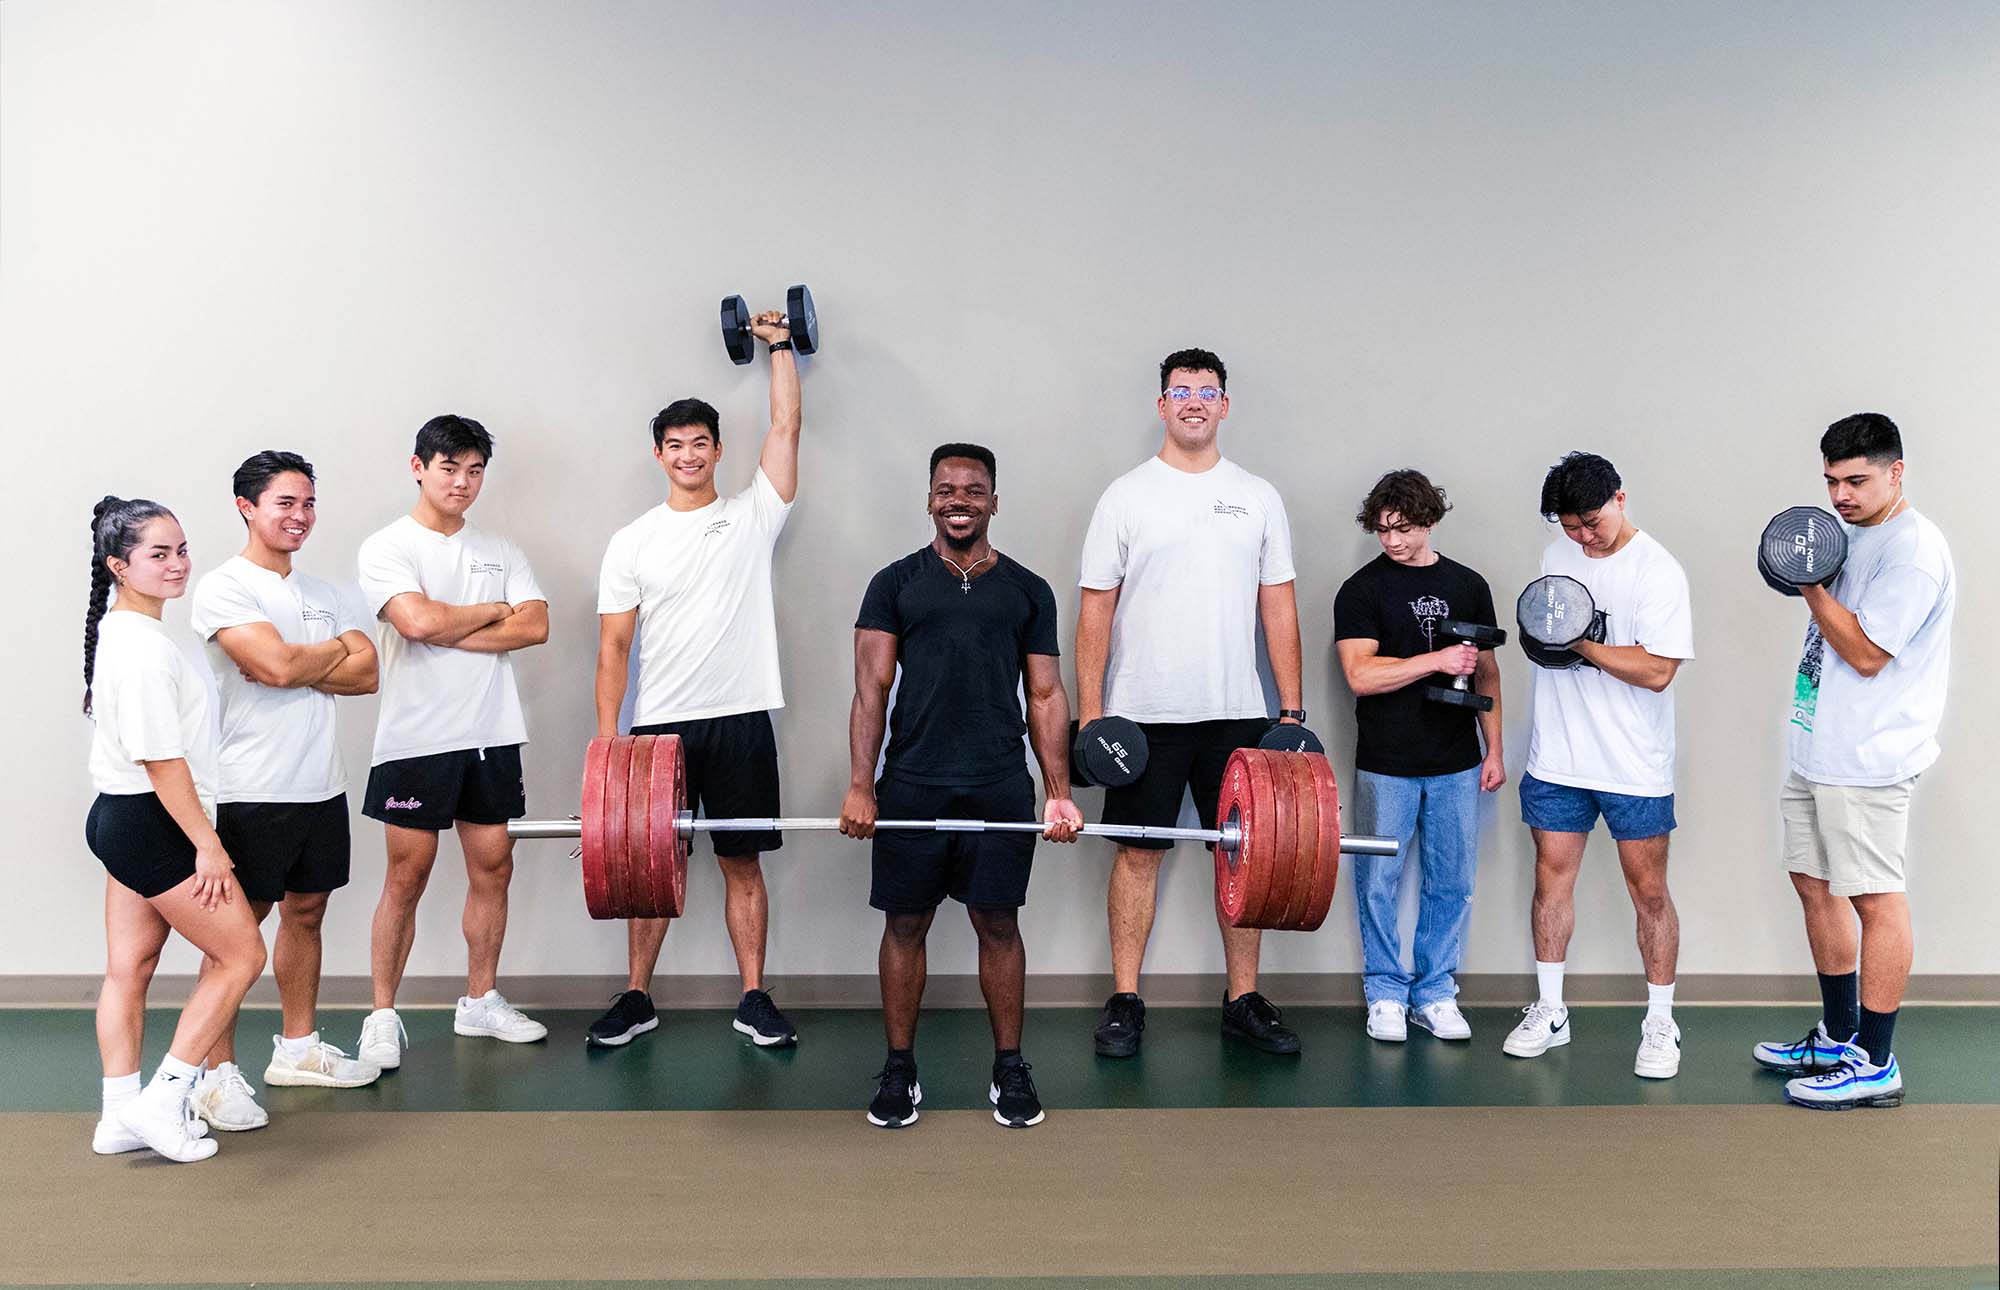 weightlifting club standing in a line smiling